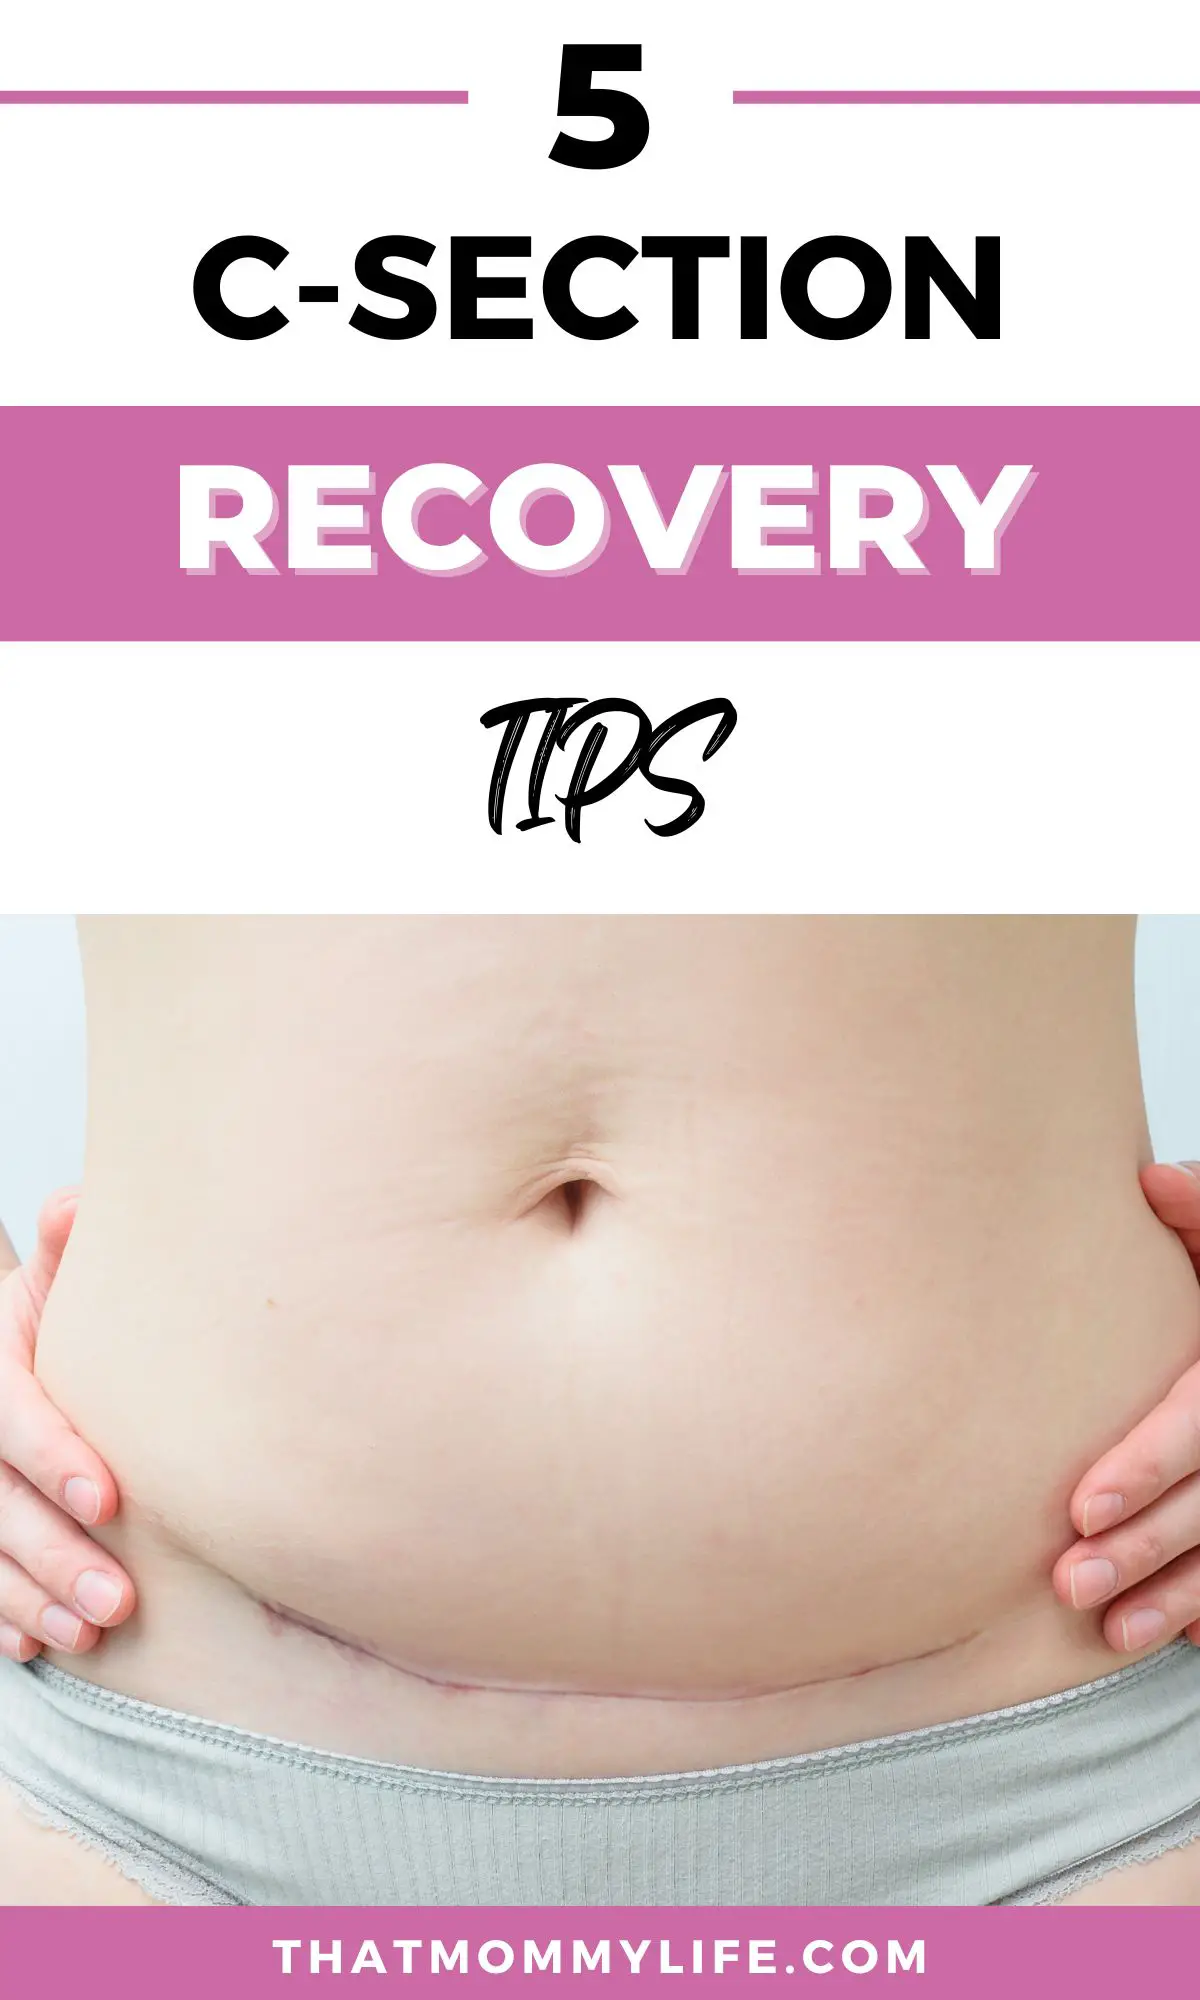 c-section recovery